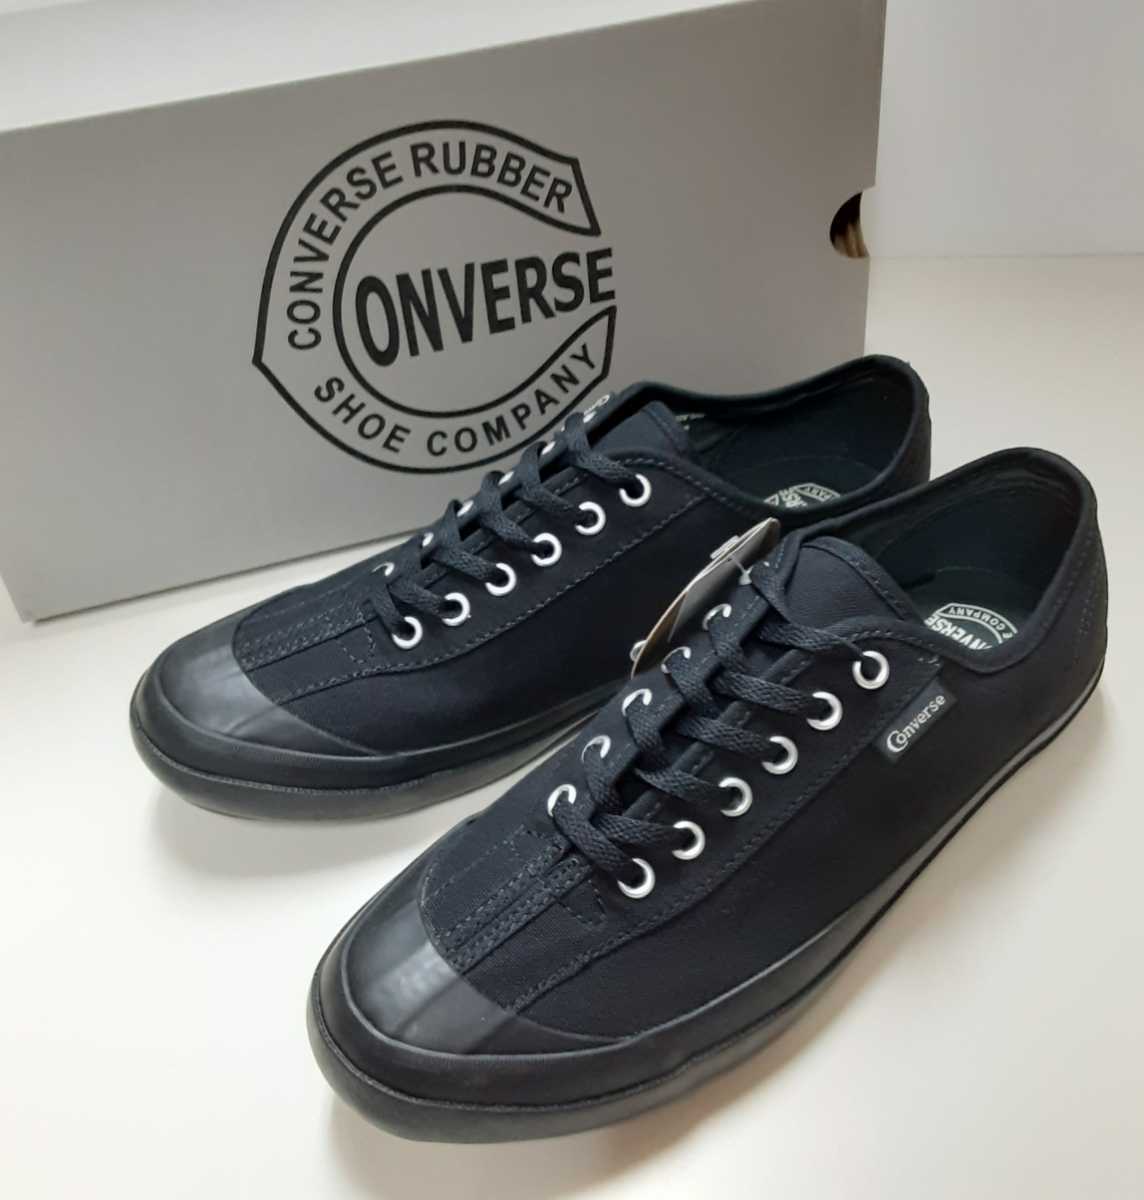  most price! regular price 6380 jpy! new goods!20 period repeated construction! Converse BIG C TS GS OX high class canvas military sneakers!. work! Triple black! black 27cm